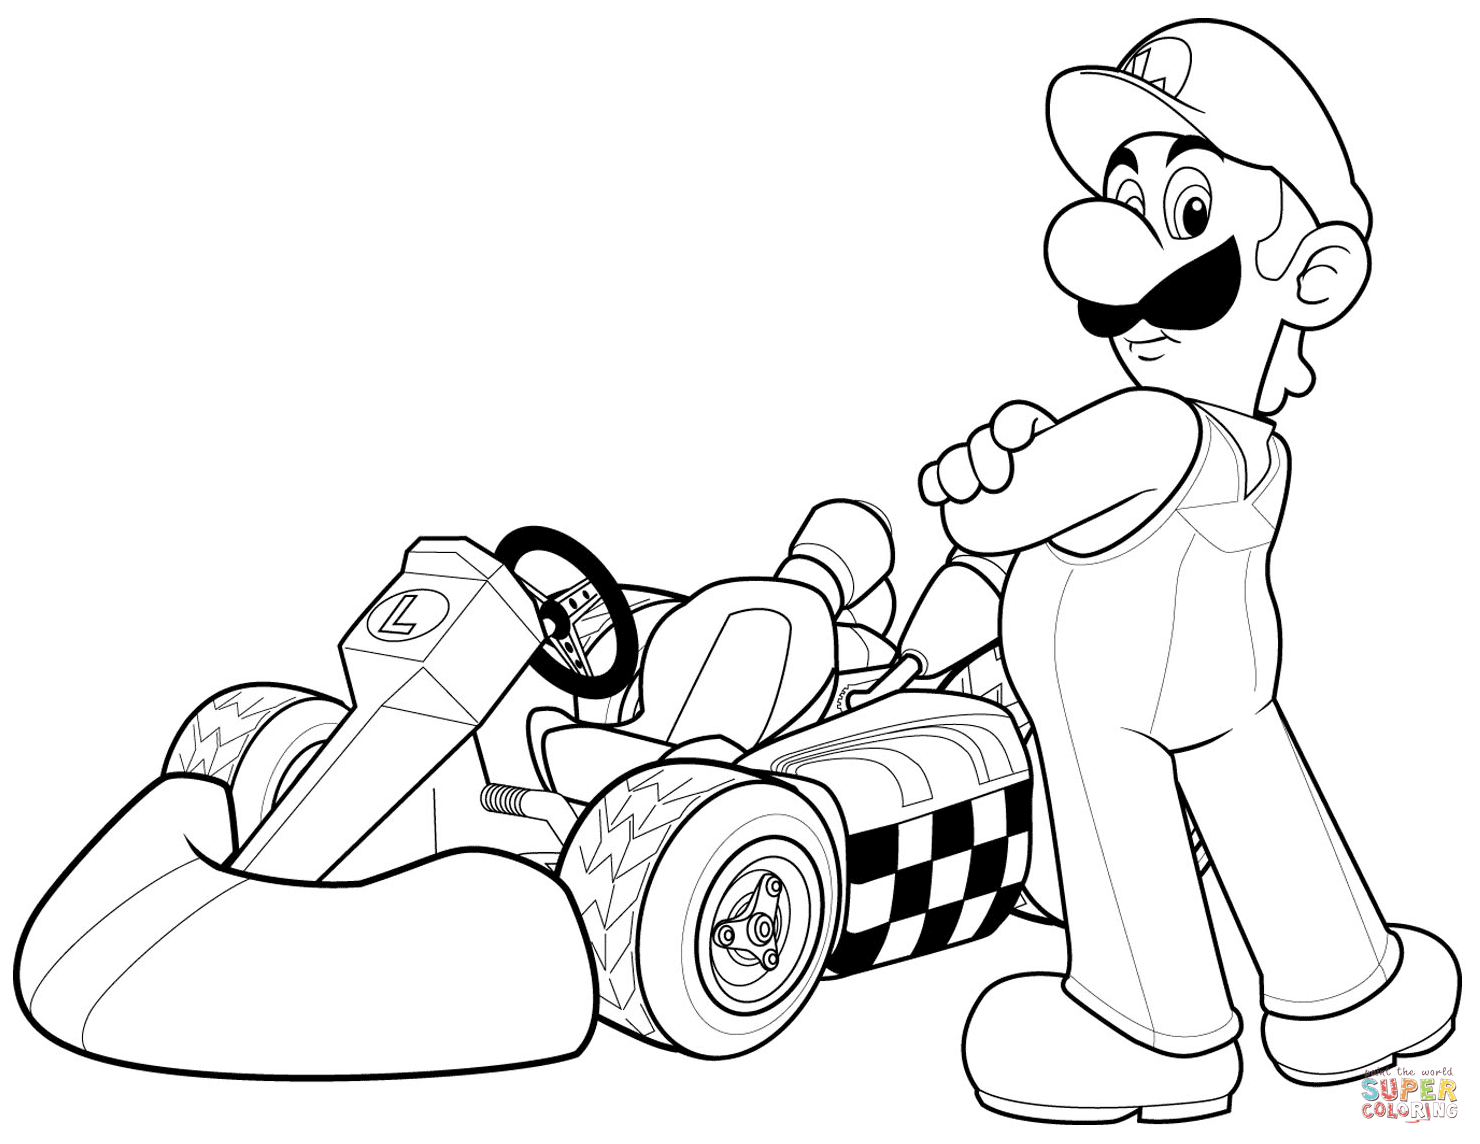 Super Mario Bros. coloring pages | Free Coloring Pages